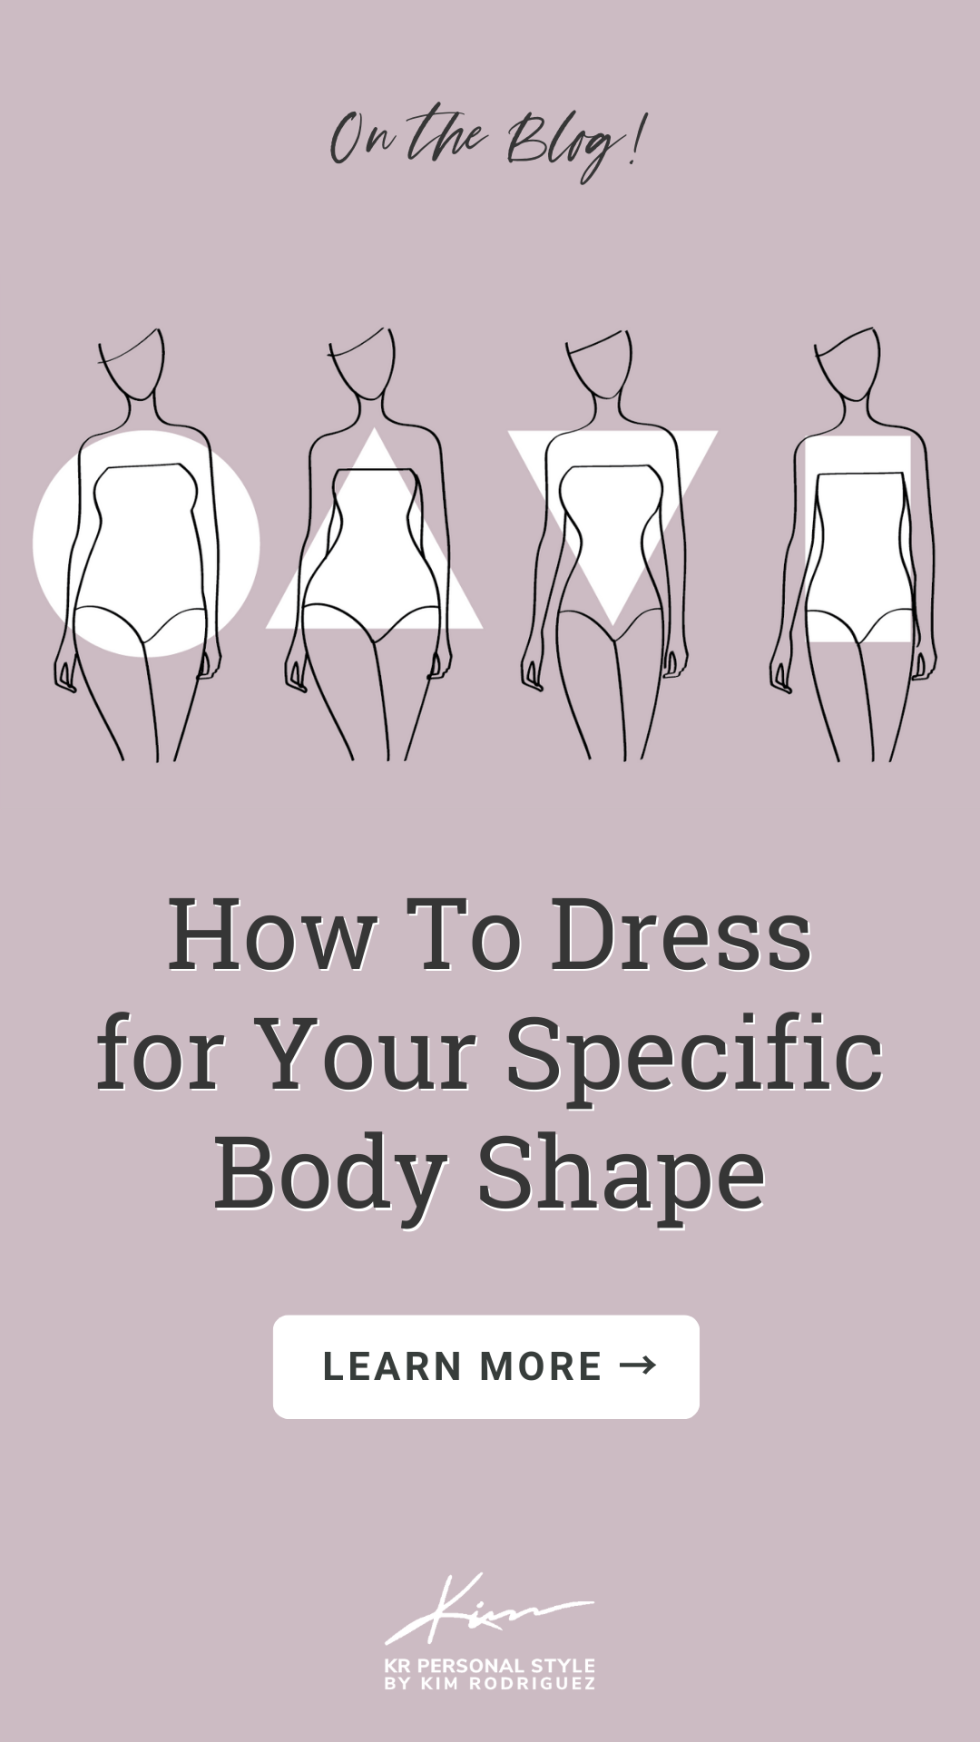 How To Dress for Your Specific Body Shape - KR Personal Style